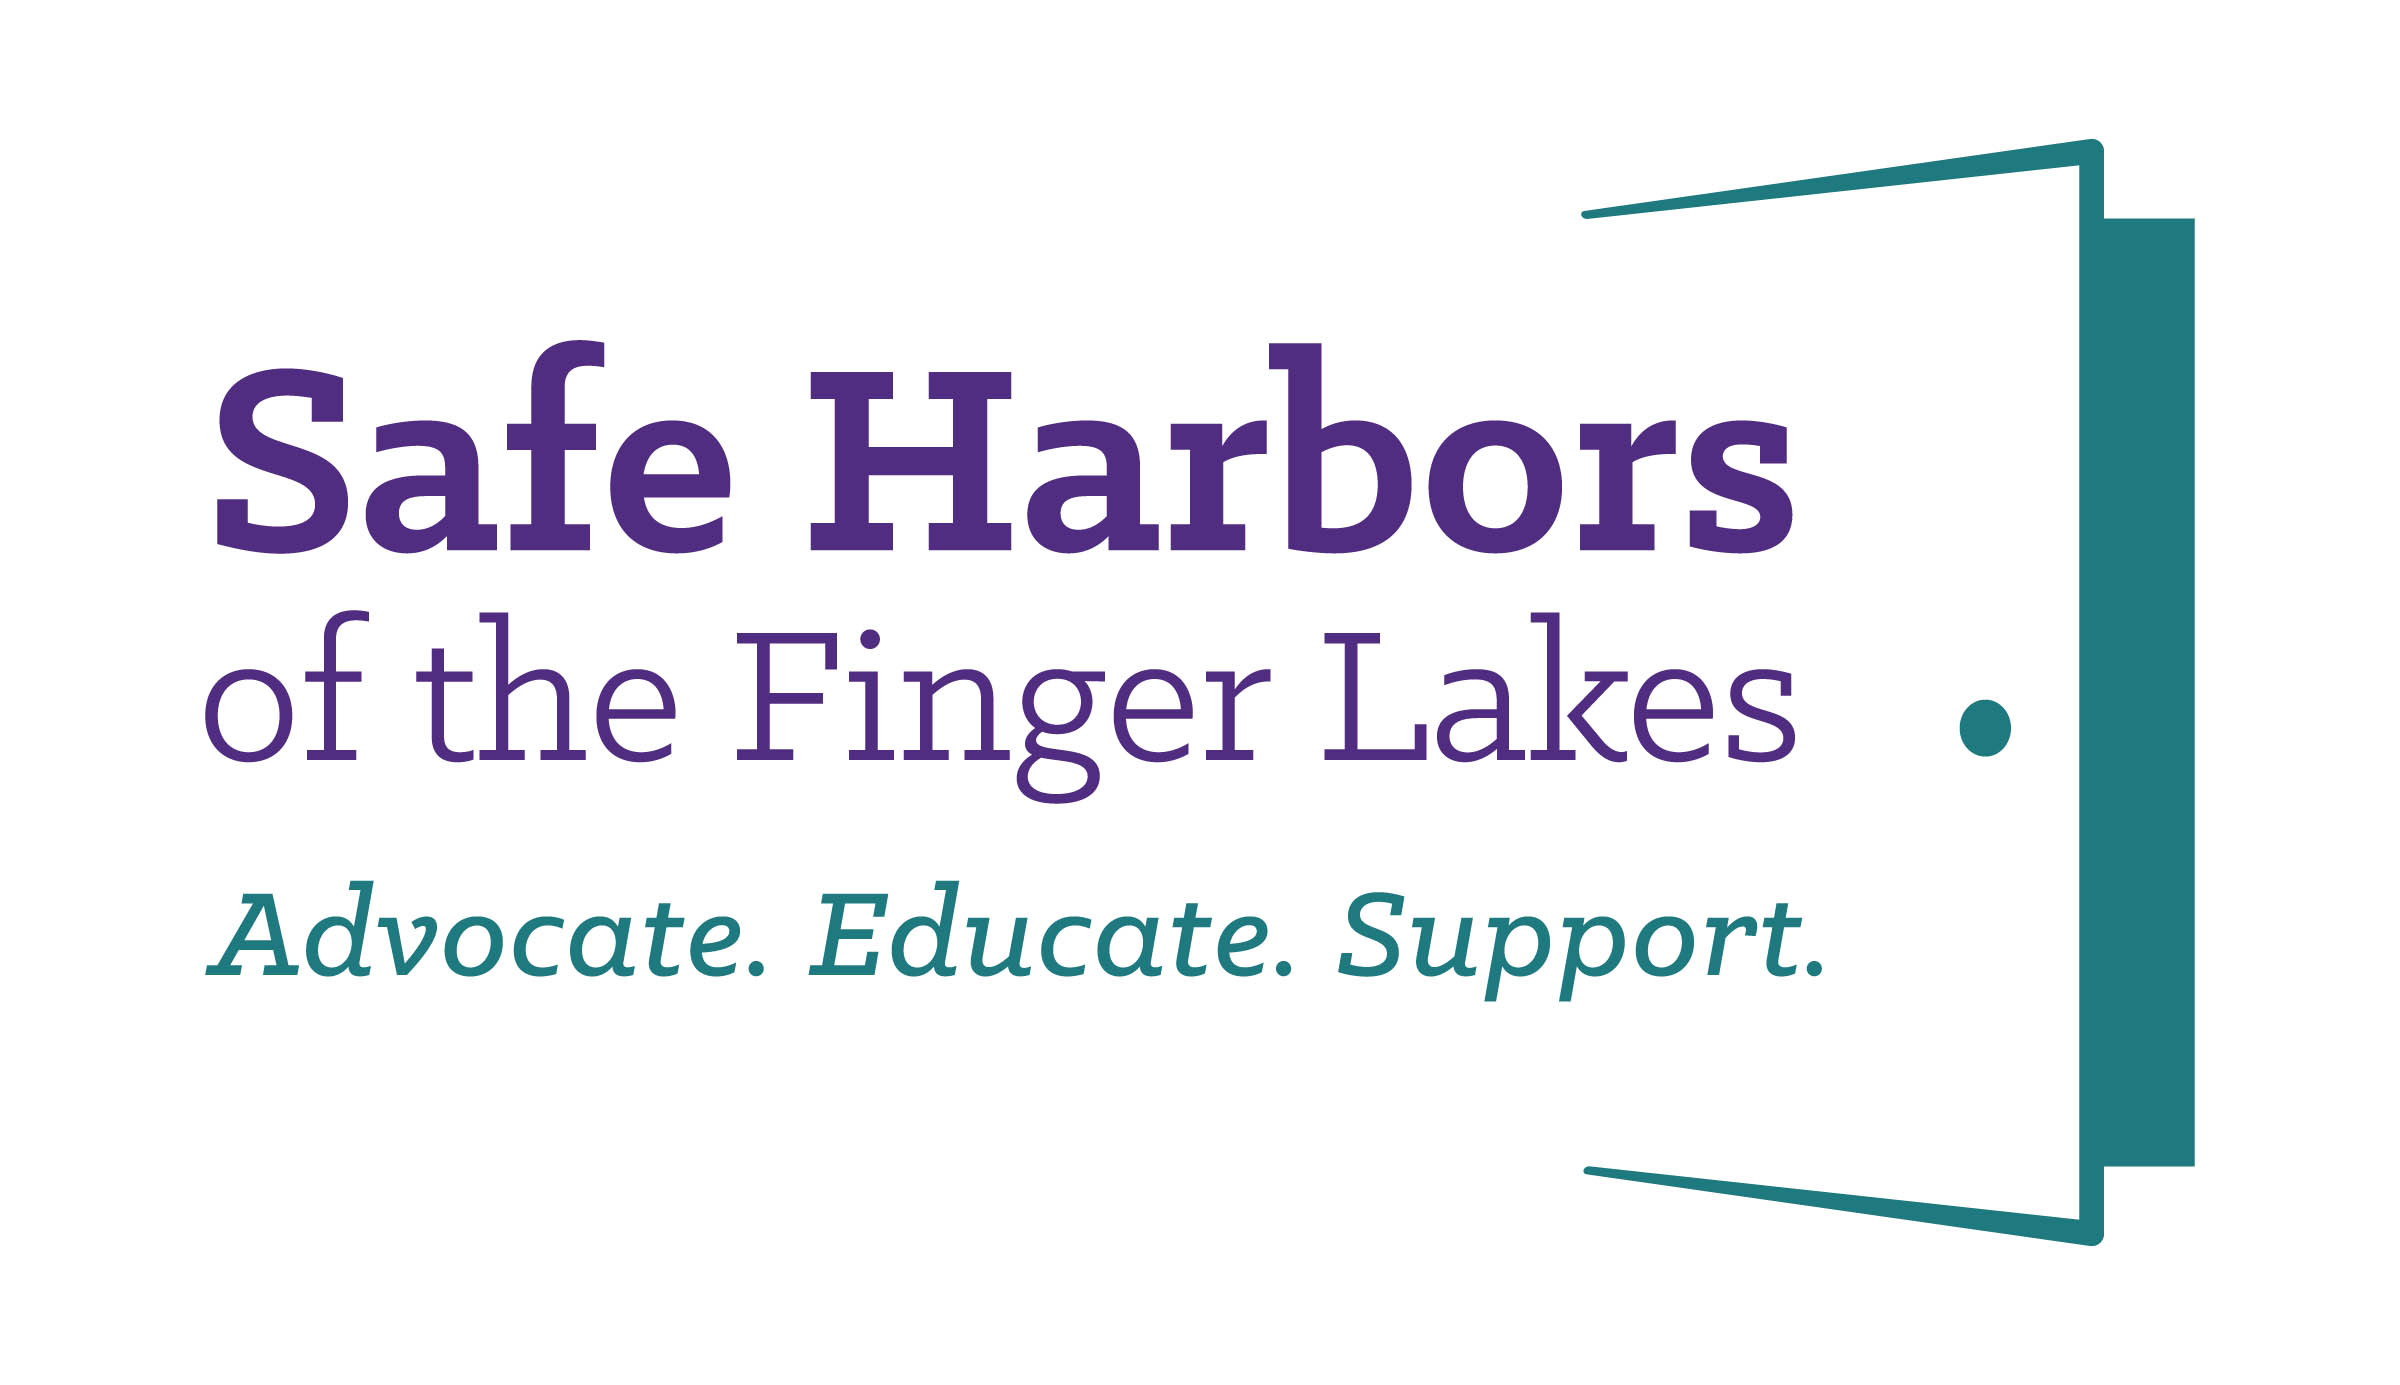 Safe Harbors of the Finger Lakes, Inc